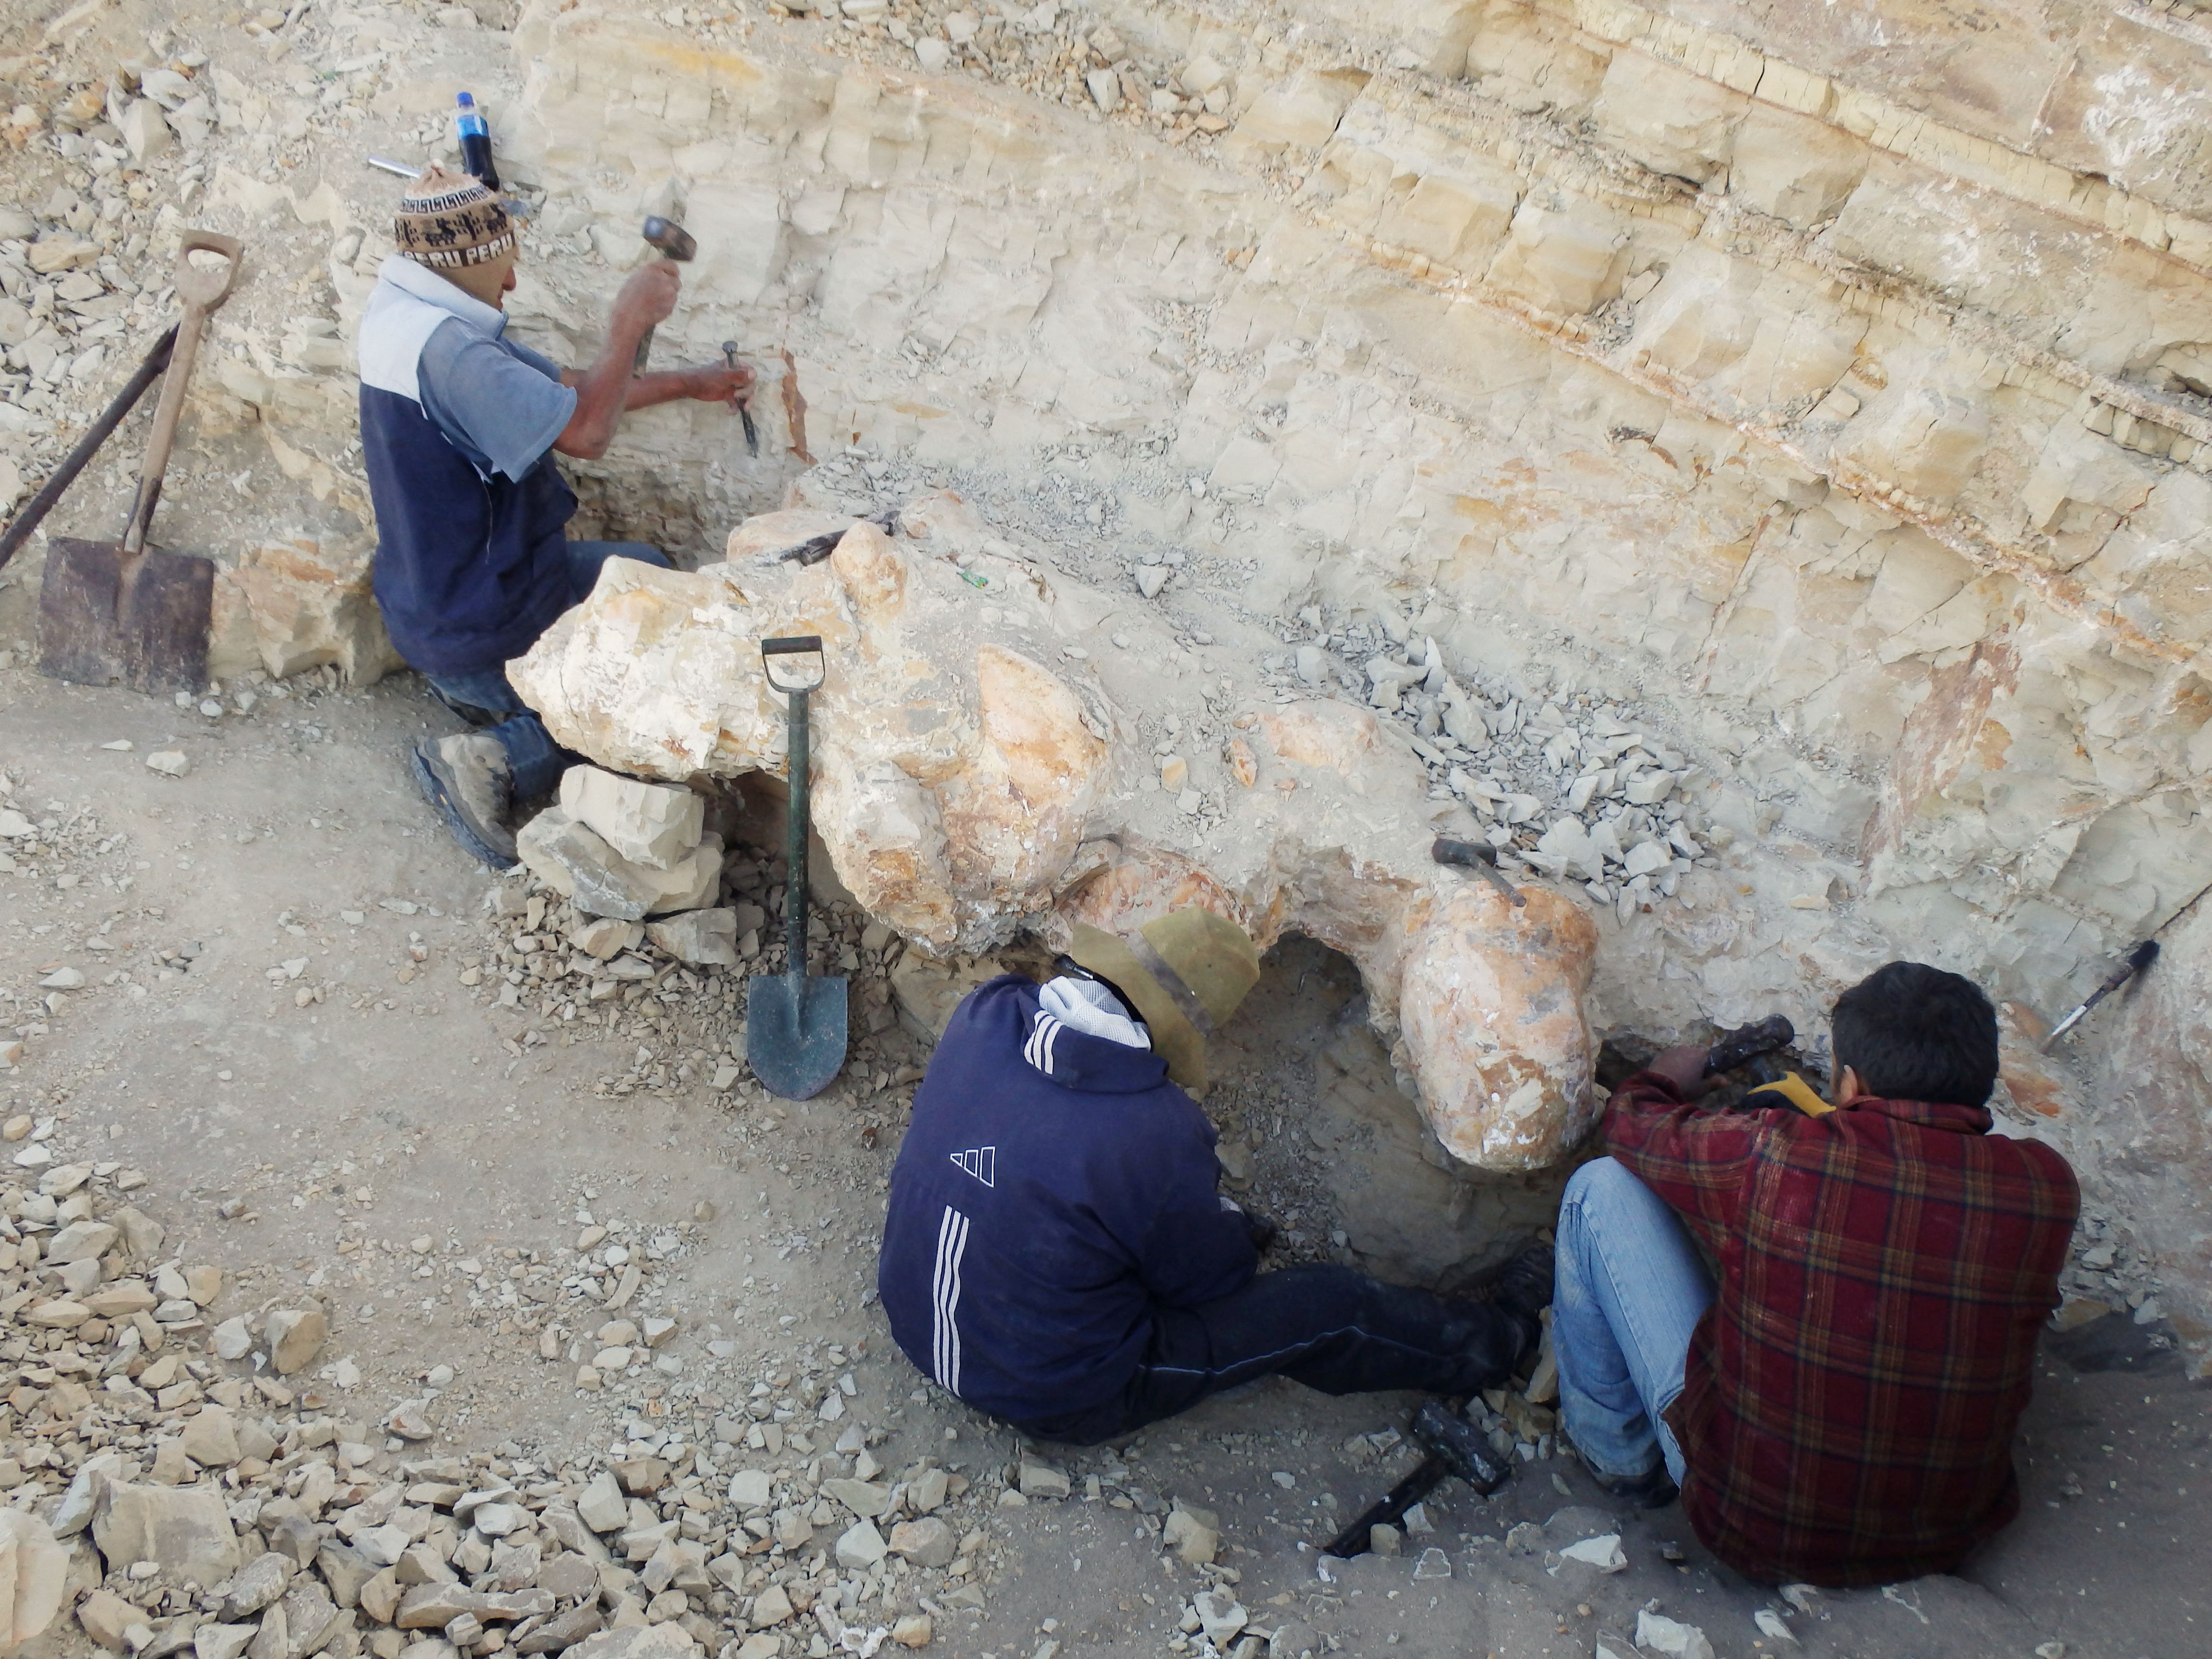 Scientists excavate a vertebra fossil of Perucetus colossus, a huge early whale that lived about 38-40 million years ago